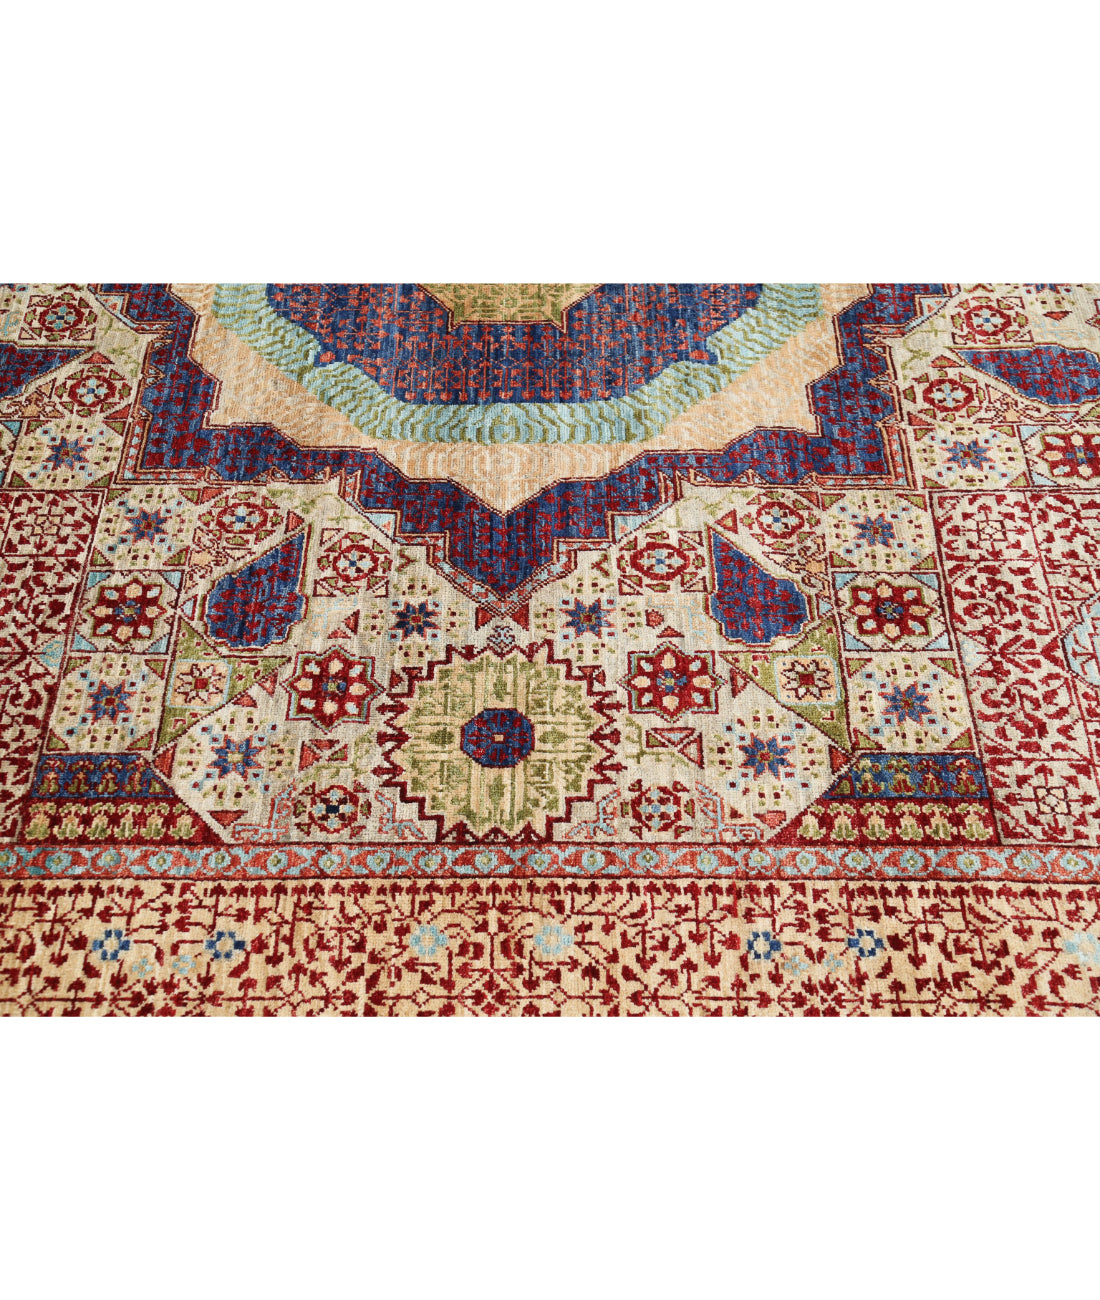 Hand Knotted Mamluk Wool Rug - 8'1'' x 10'0'' 8'1'' x 10'0'' (243 X 300) / Beige / Red